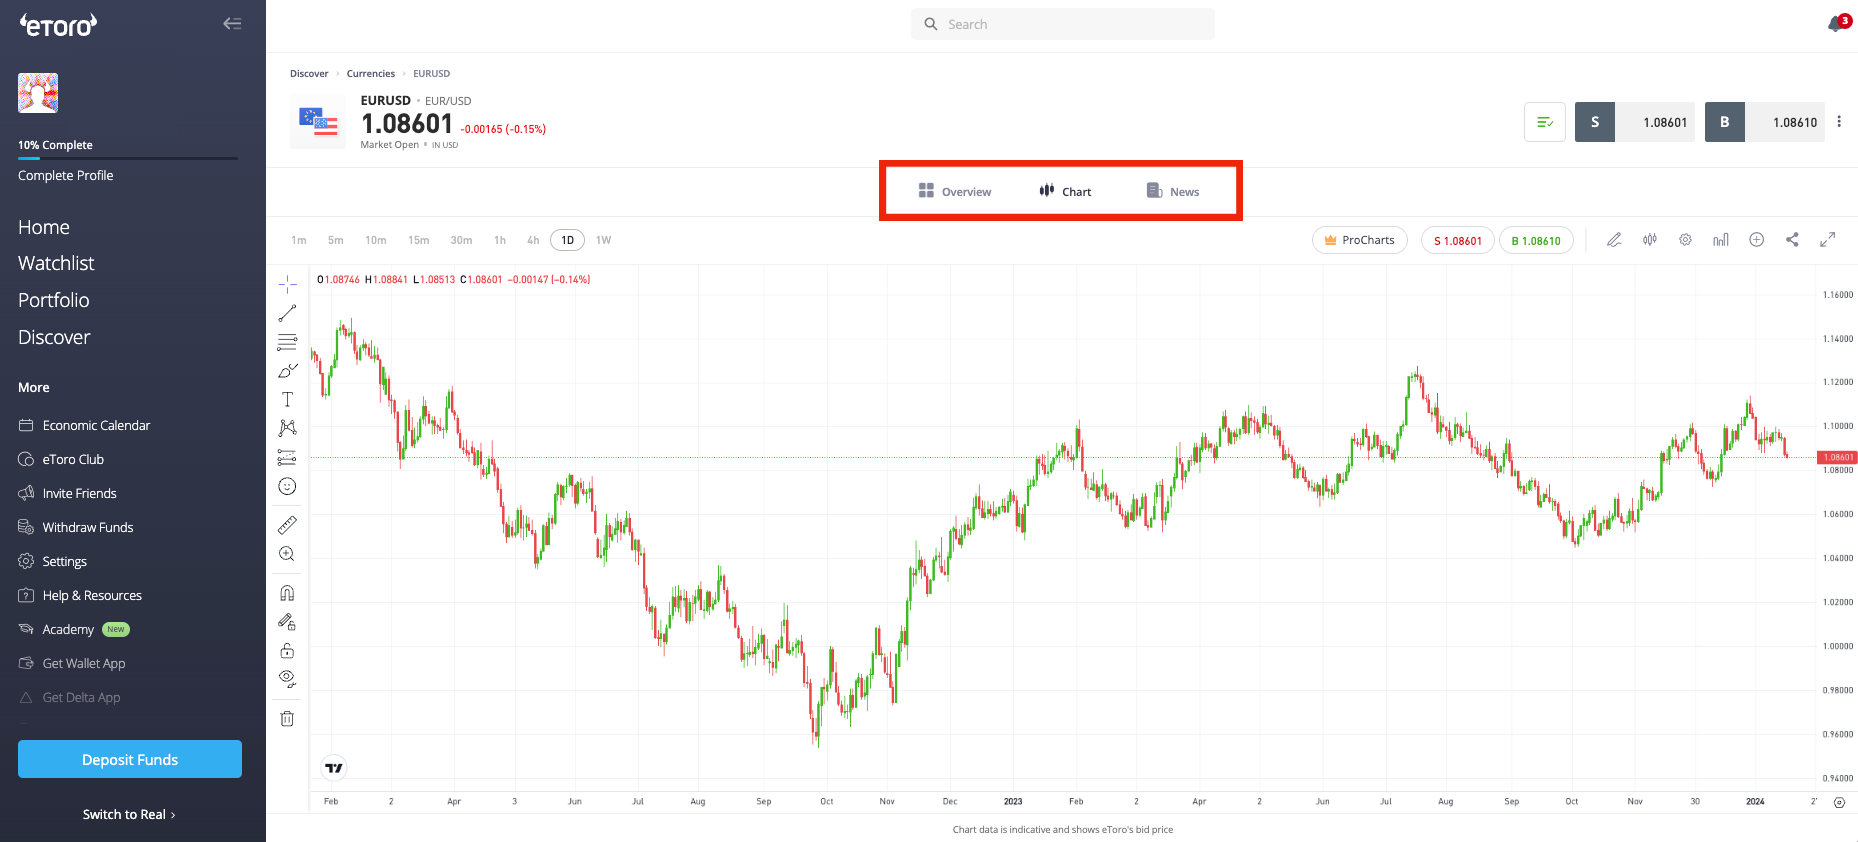 eToro web platform showing Overview, Chart and News tabs